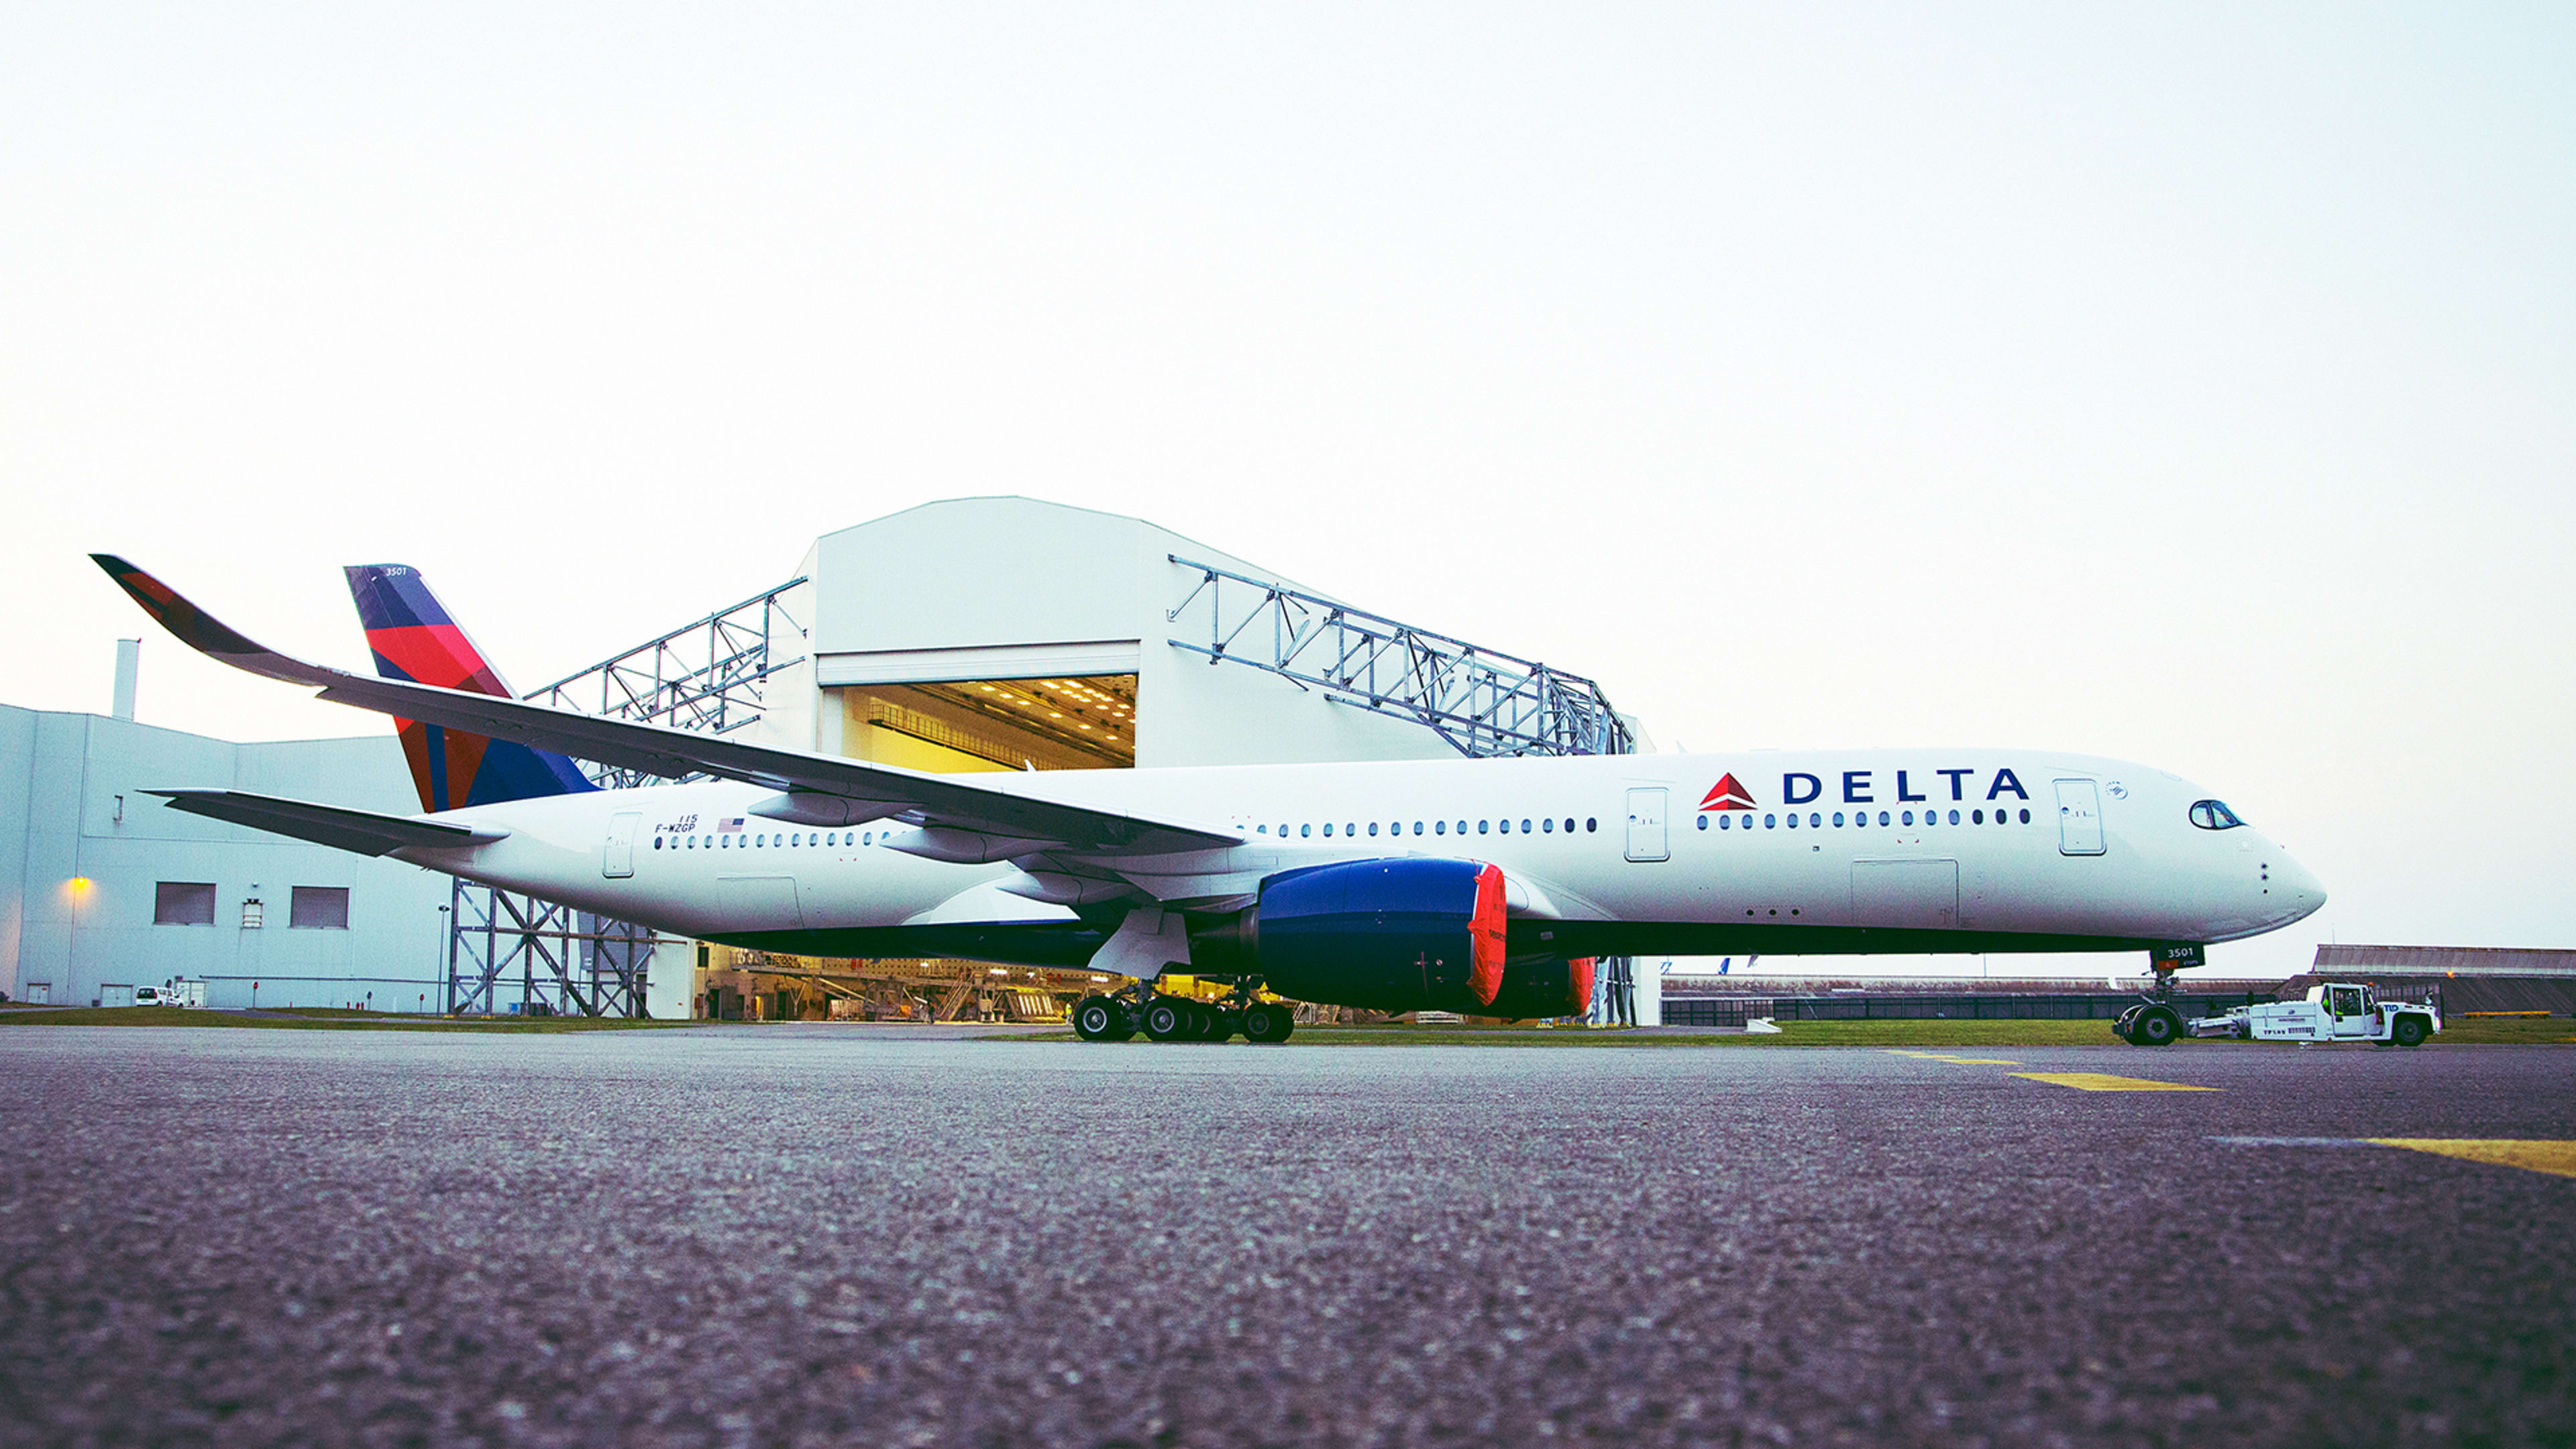 Delta passengers took their carry-ons off the plane during an emergency exit